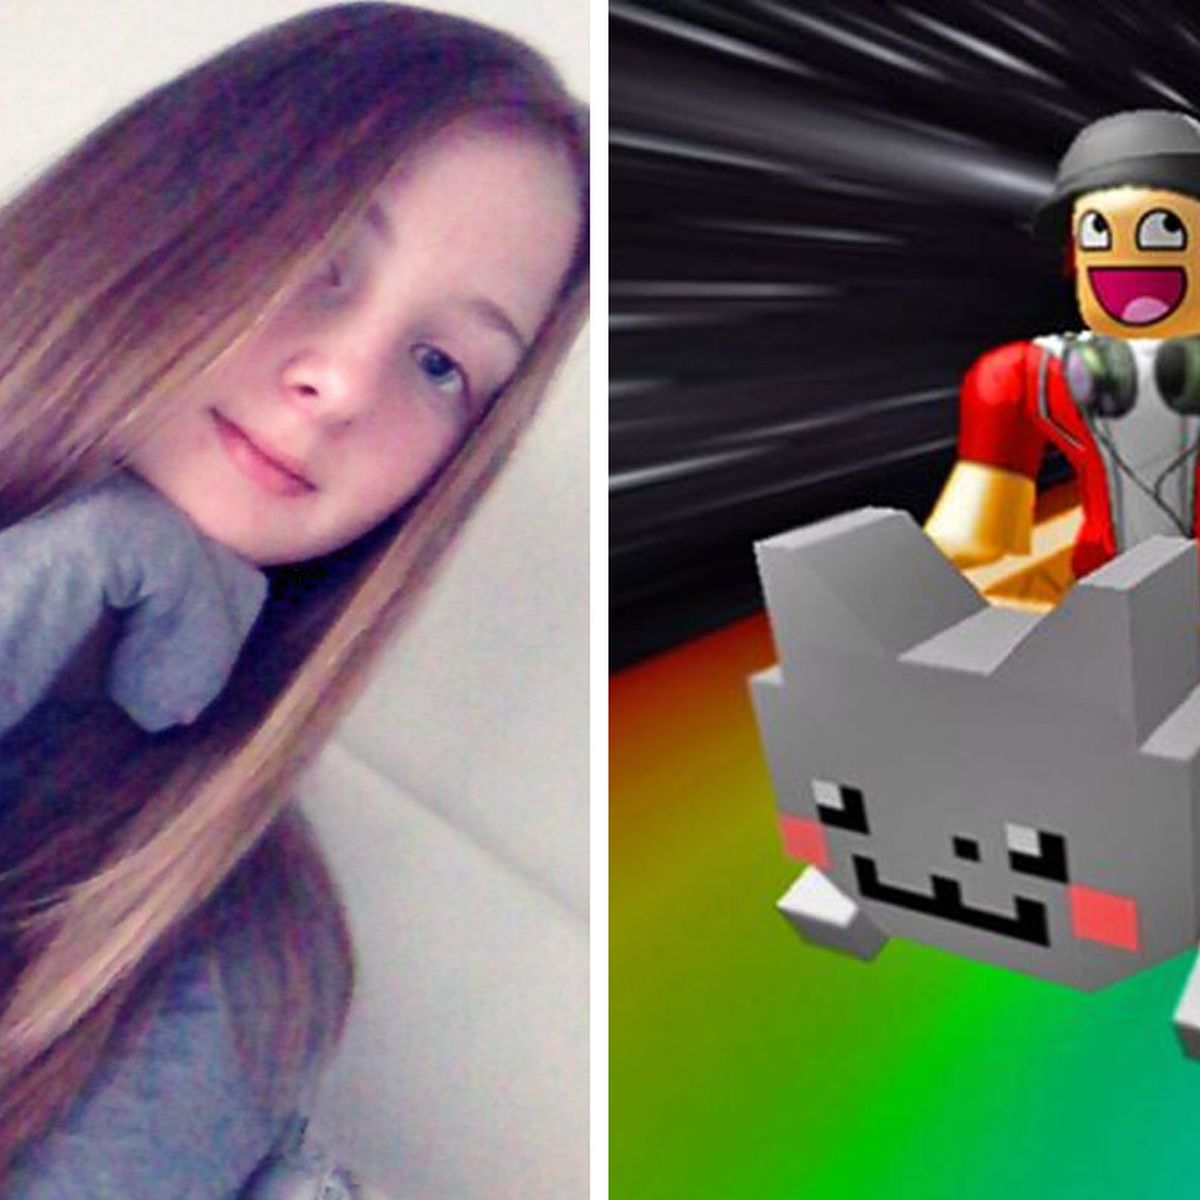 It Made Me Feel Sick Adelaide Girl 12 Targeted By Predator On Kids Game Roblox - kidnapped roblox player